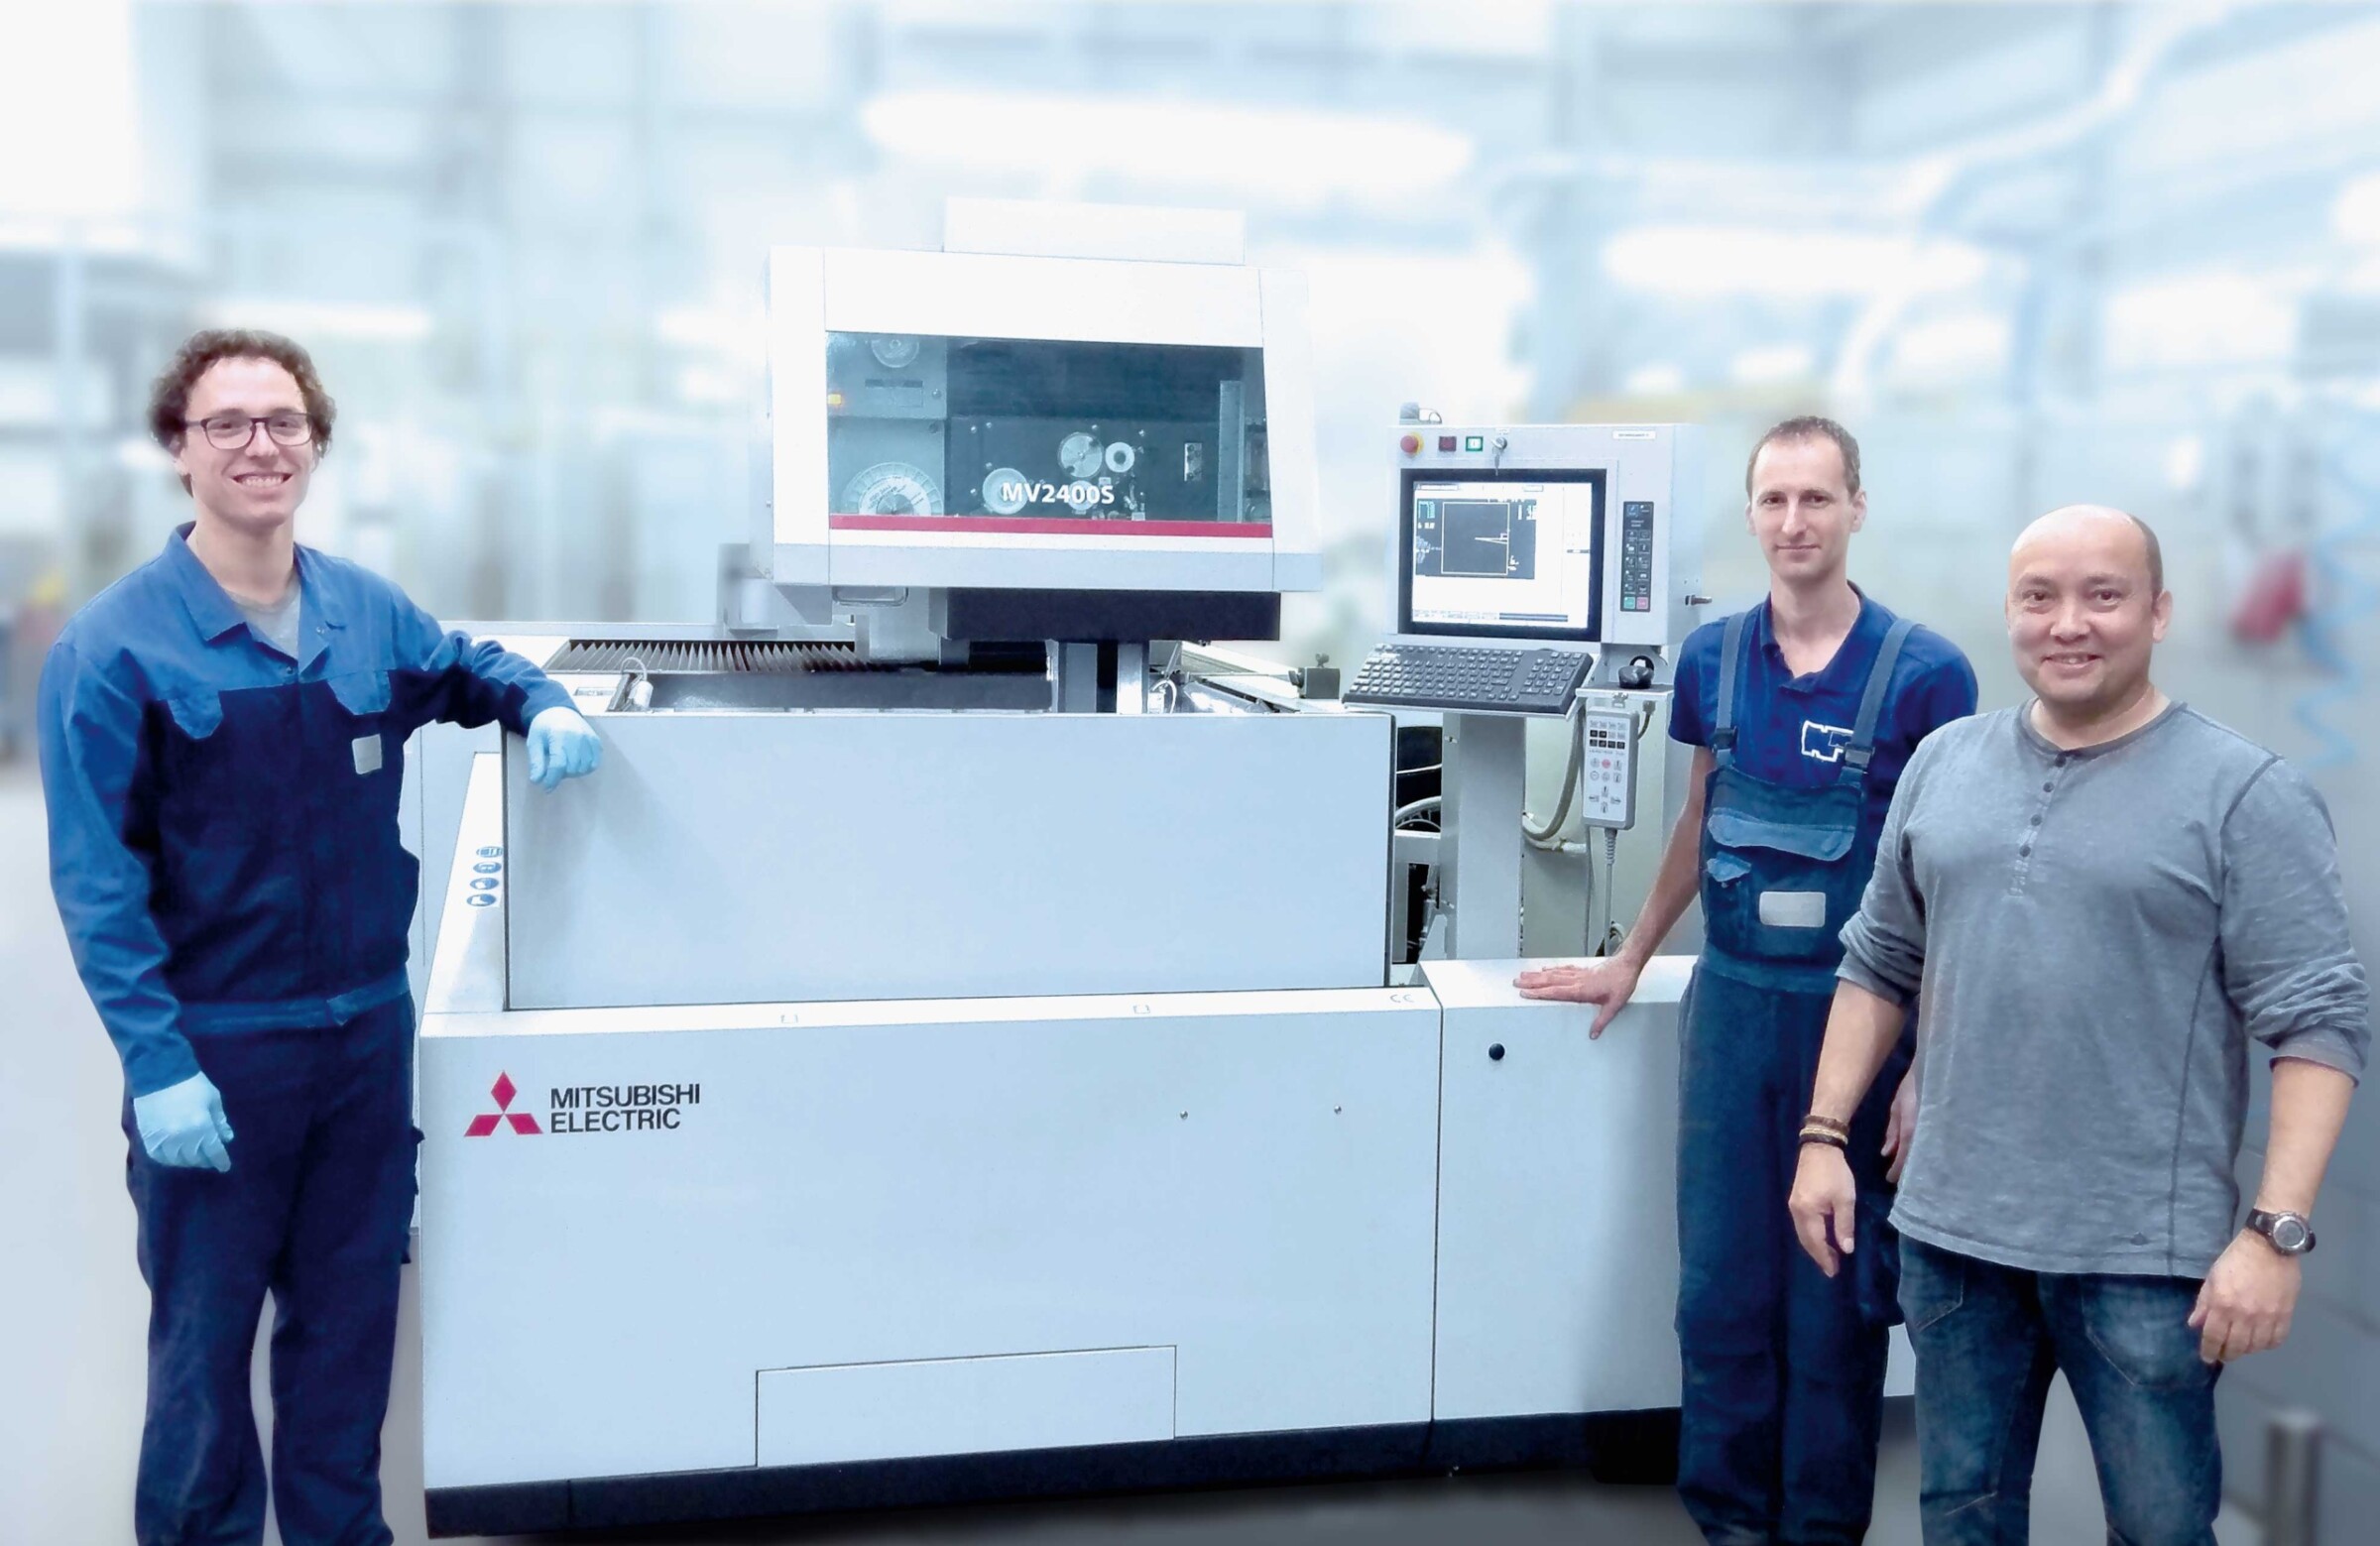 A proud team – in good spirits thanks to reliable EDM technology.